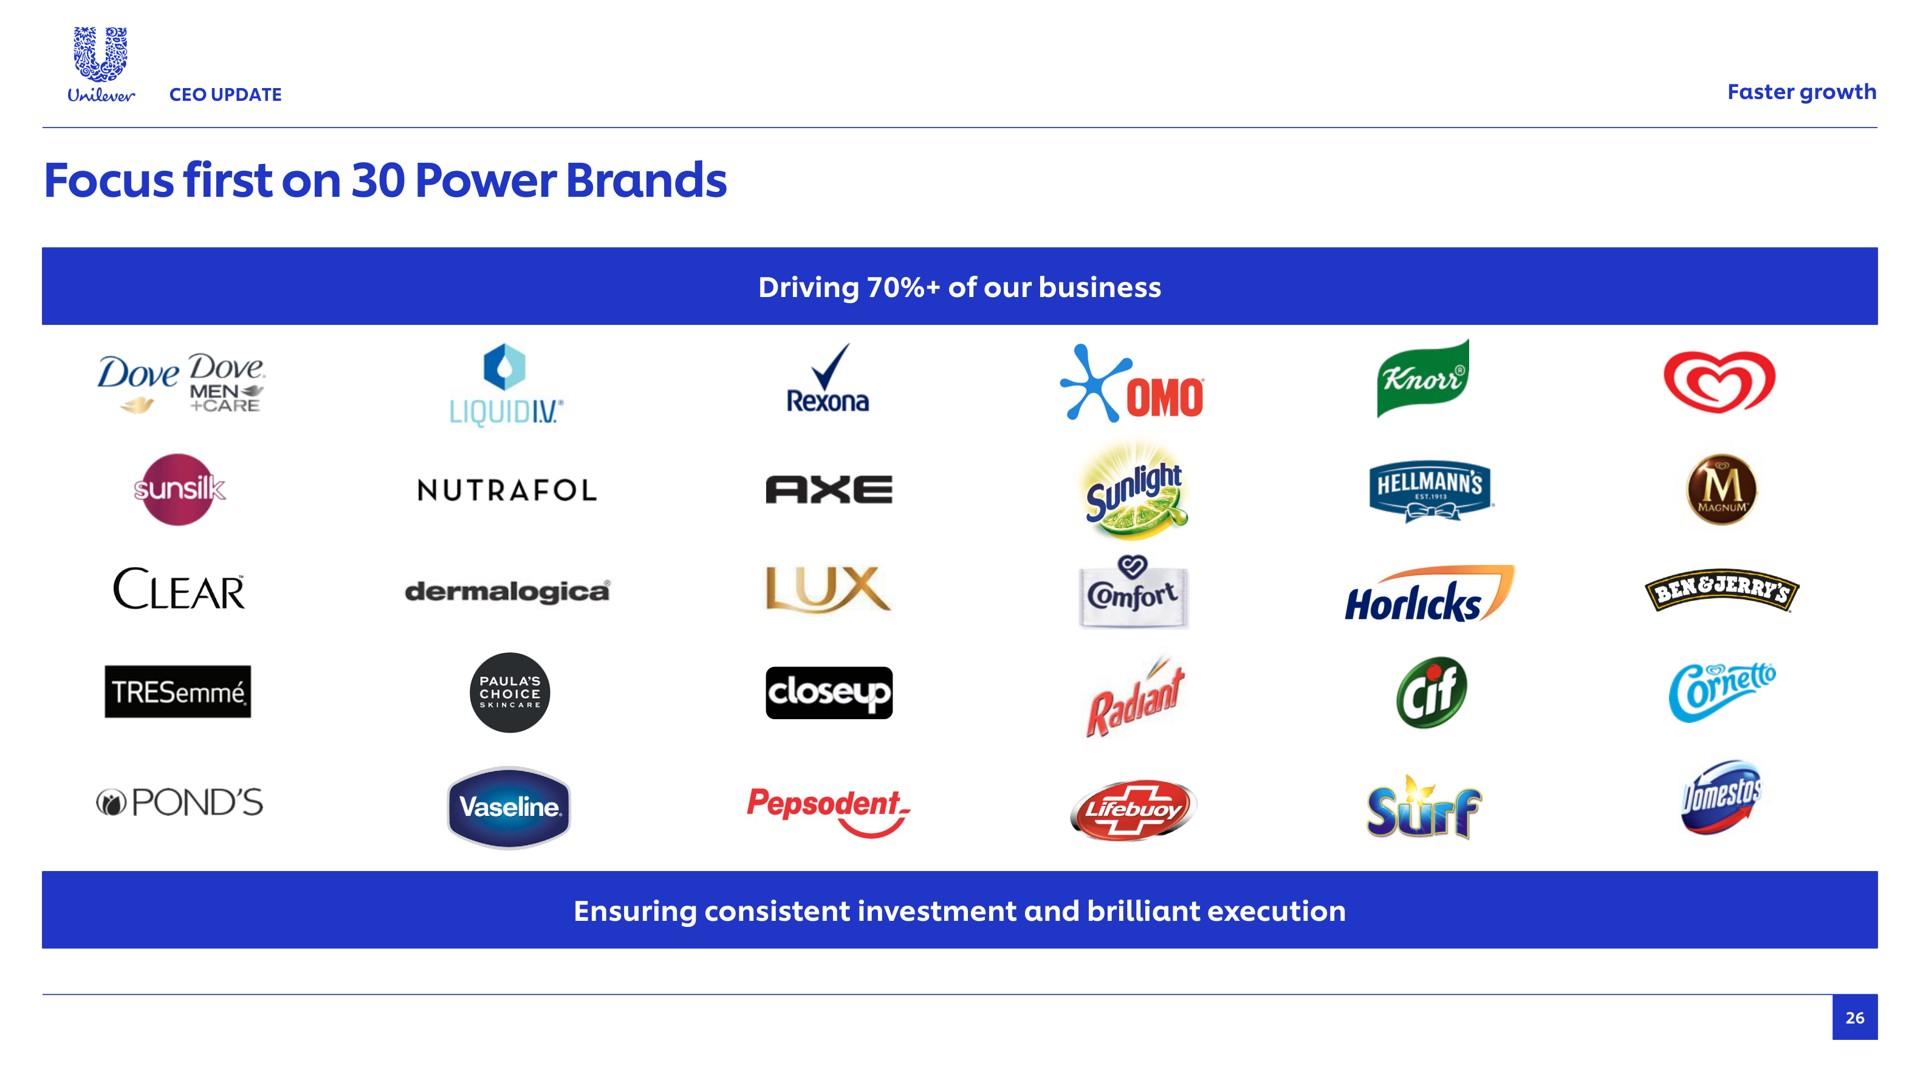 focus first on power brands faster growth dove dove ore mens clear driving of our business i axe lux as pond pole gee urf ensuring consistent investment and brilliant execution | Unilever